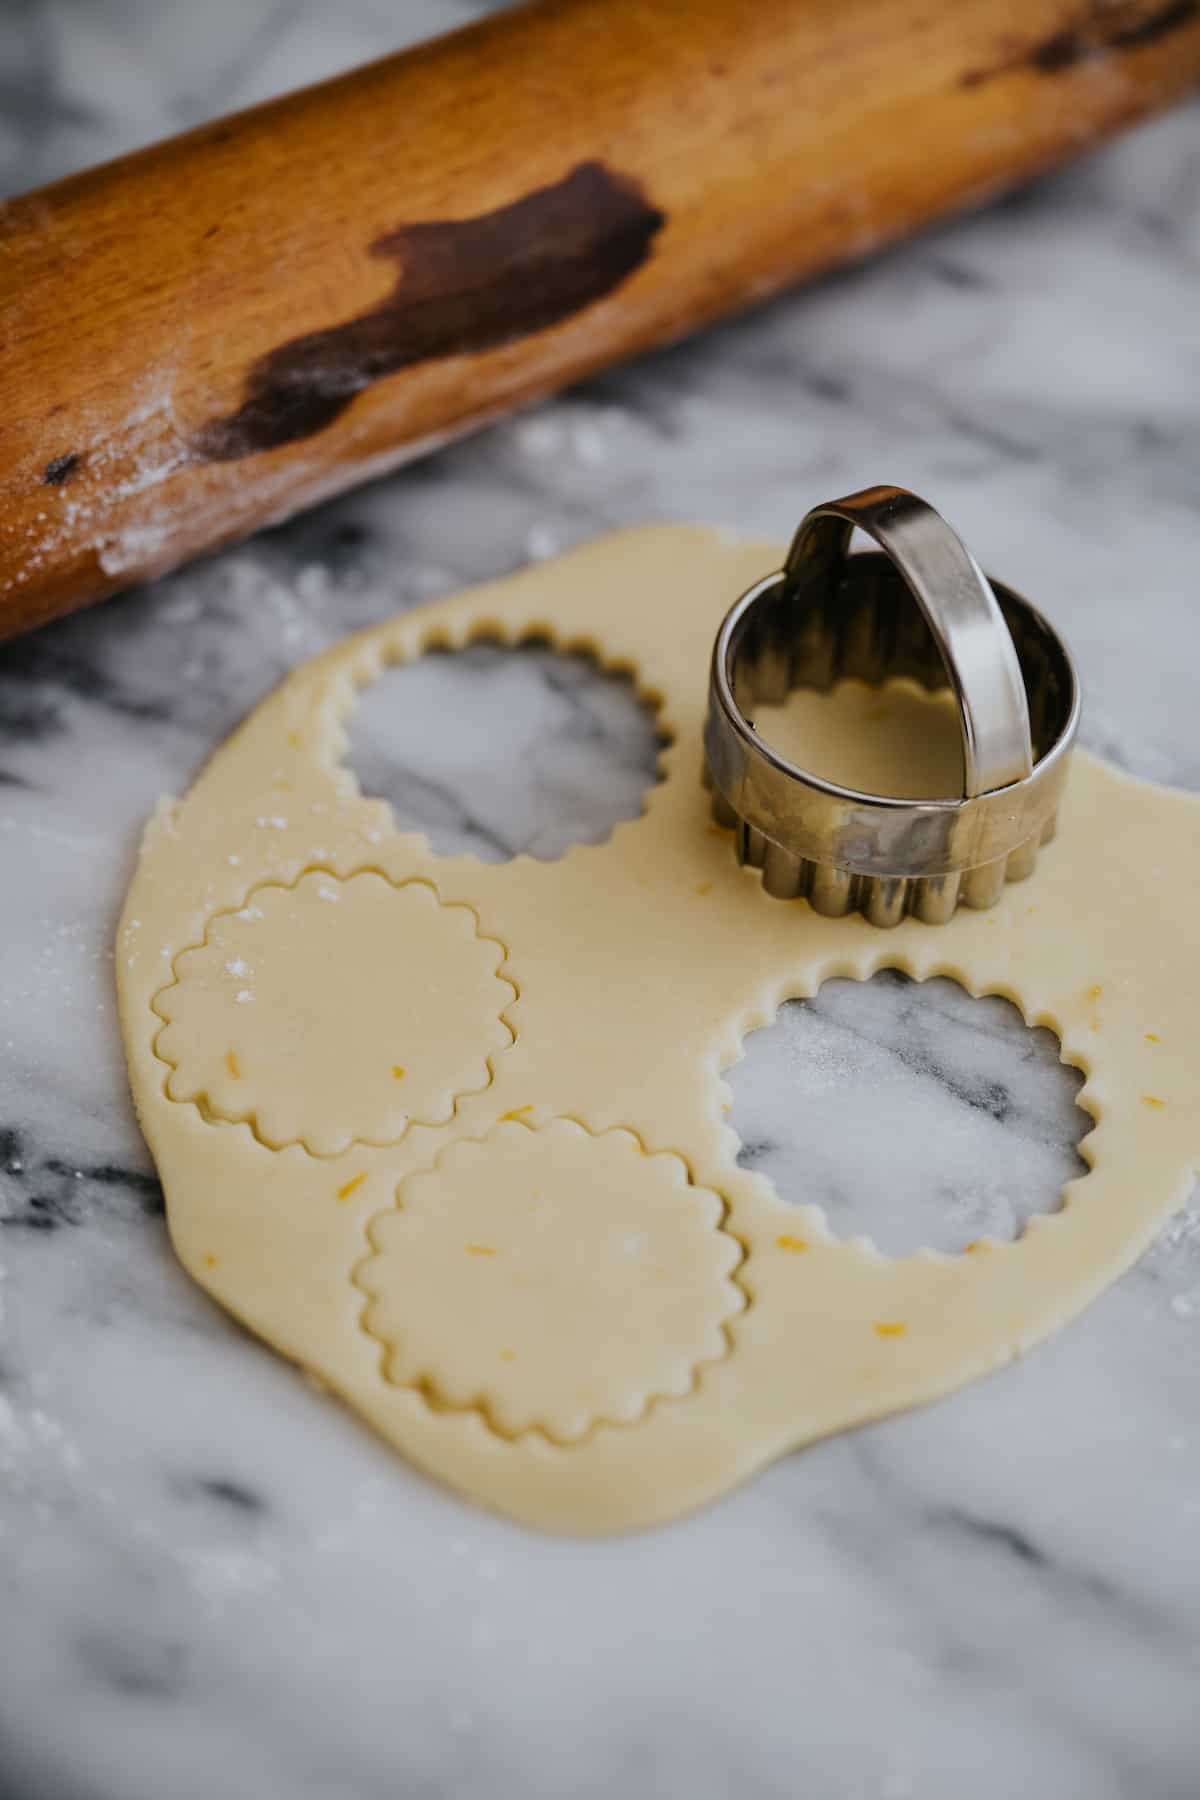 stamping out scalloped-edged cookies from the rolled out dough for making alfajores.